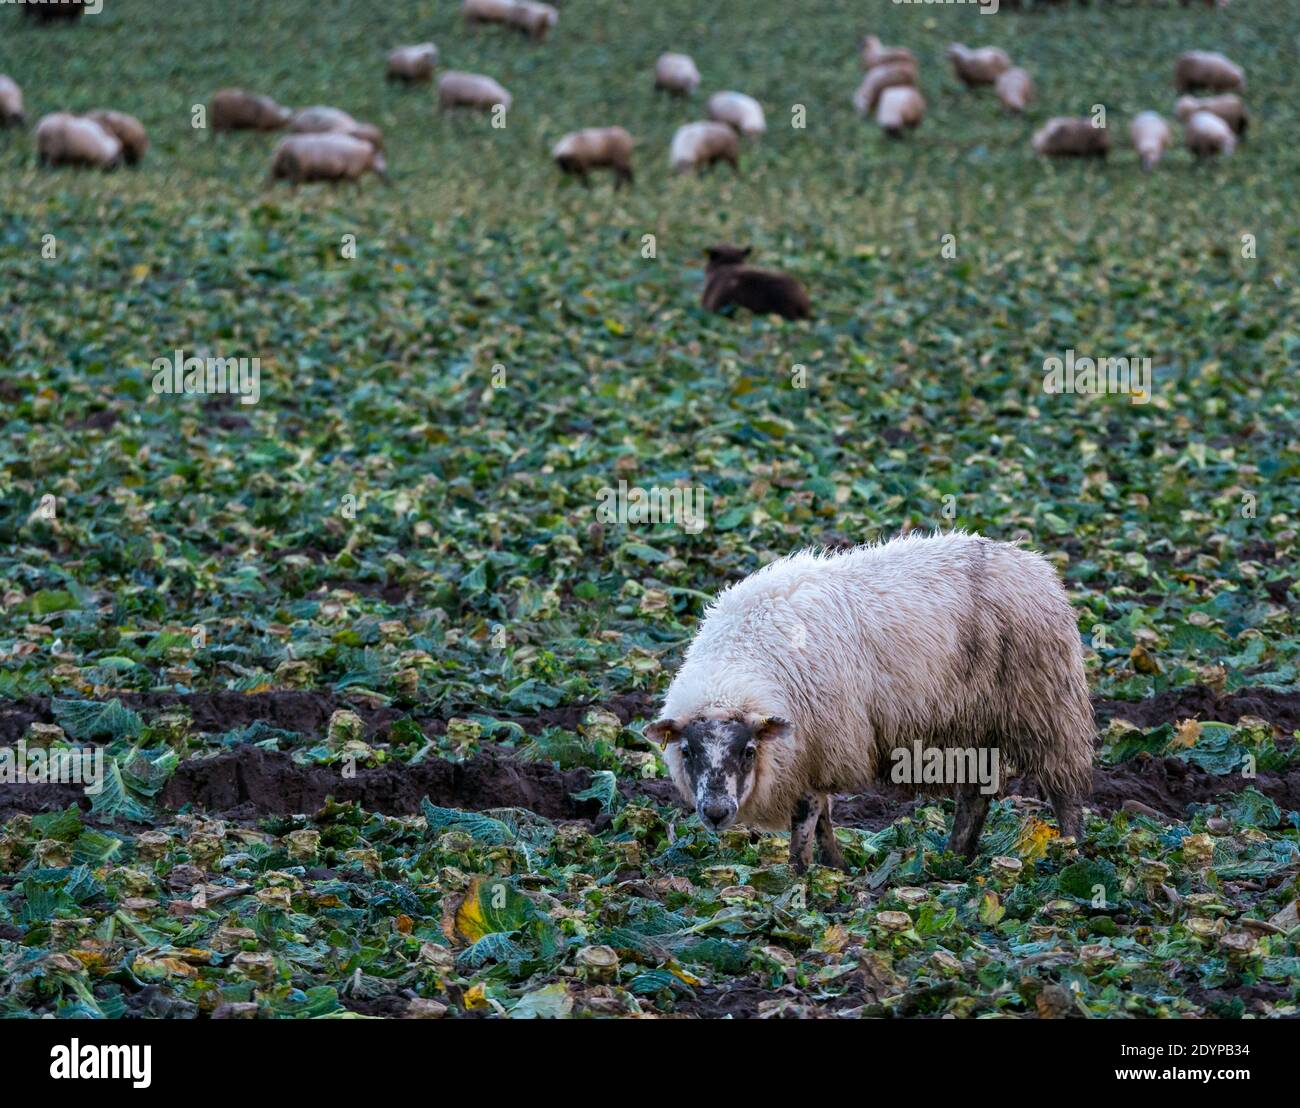 Sheep in harvested cabbage field eating remains, East Lothian, Scotland, UK Stock Photo